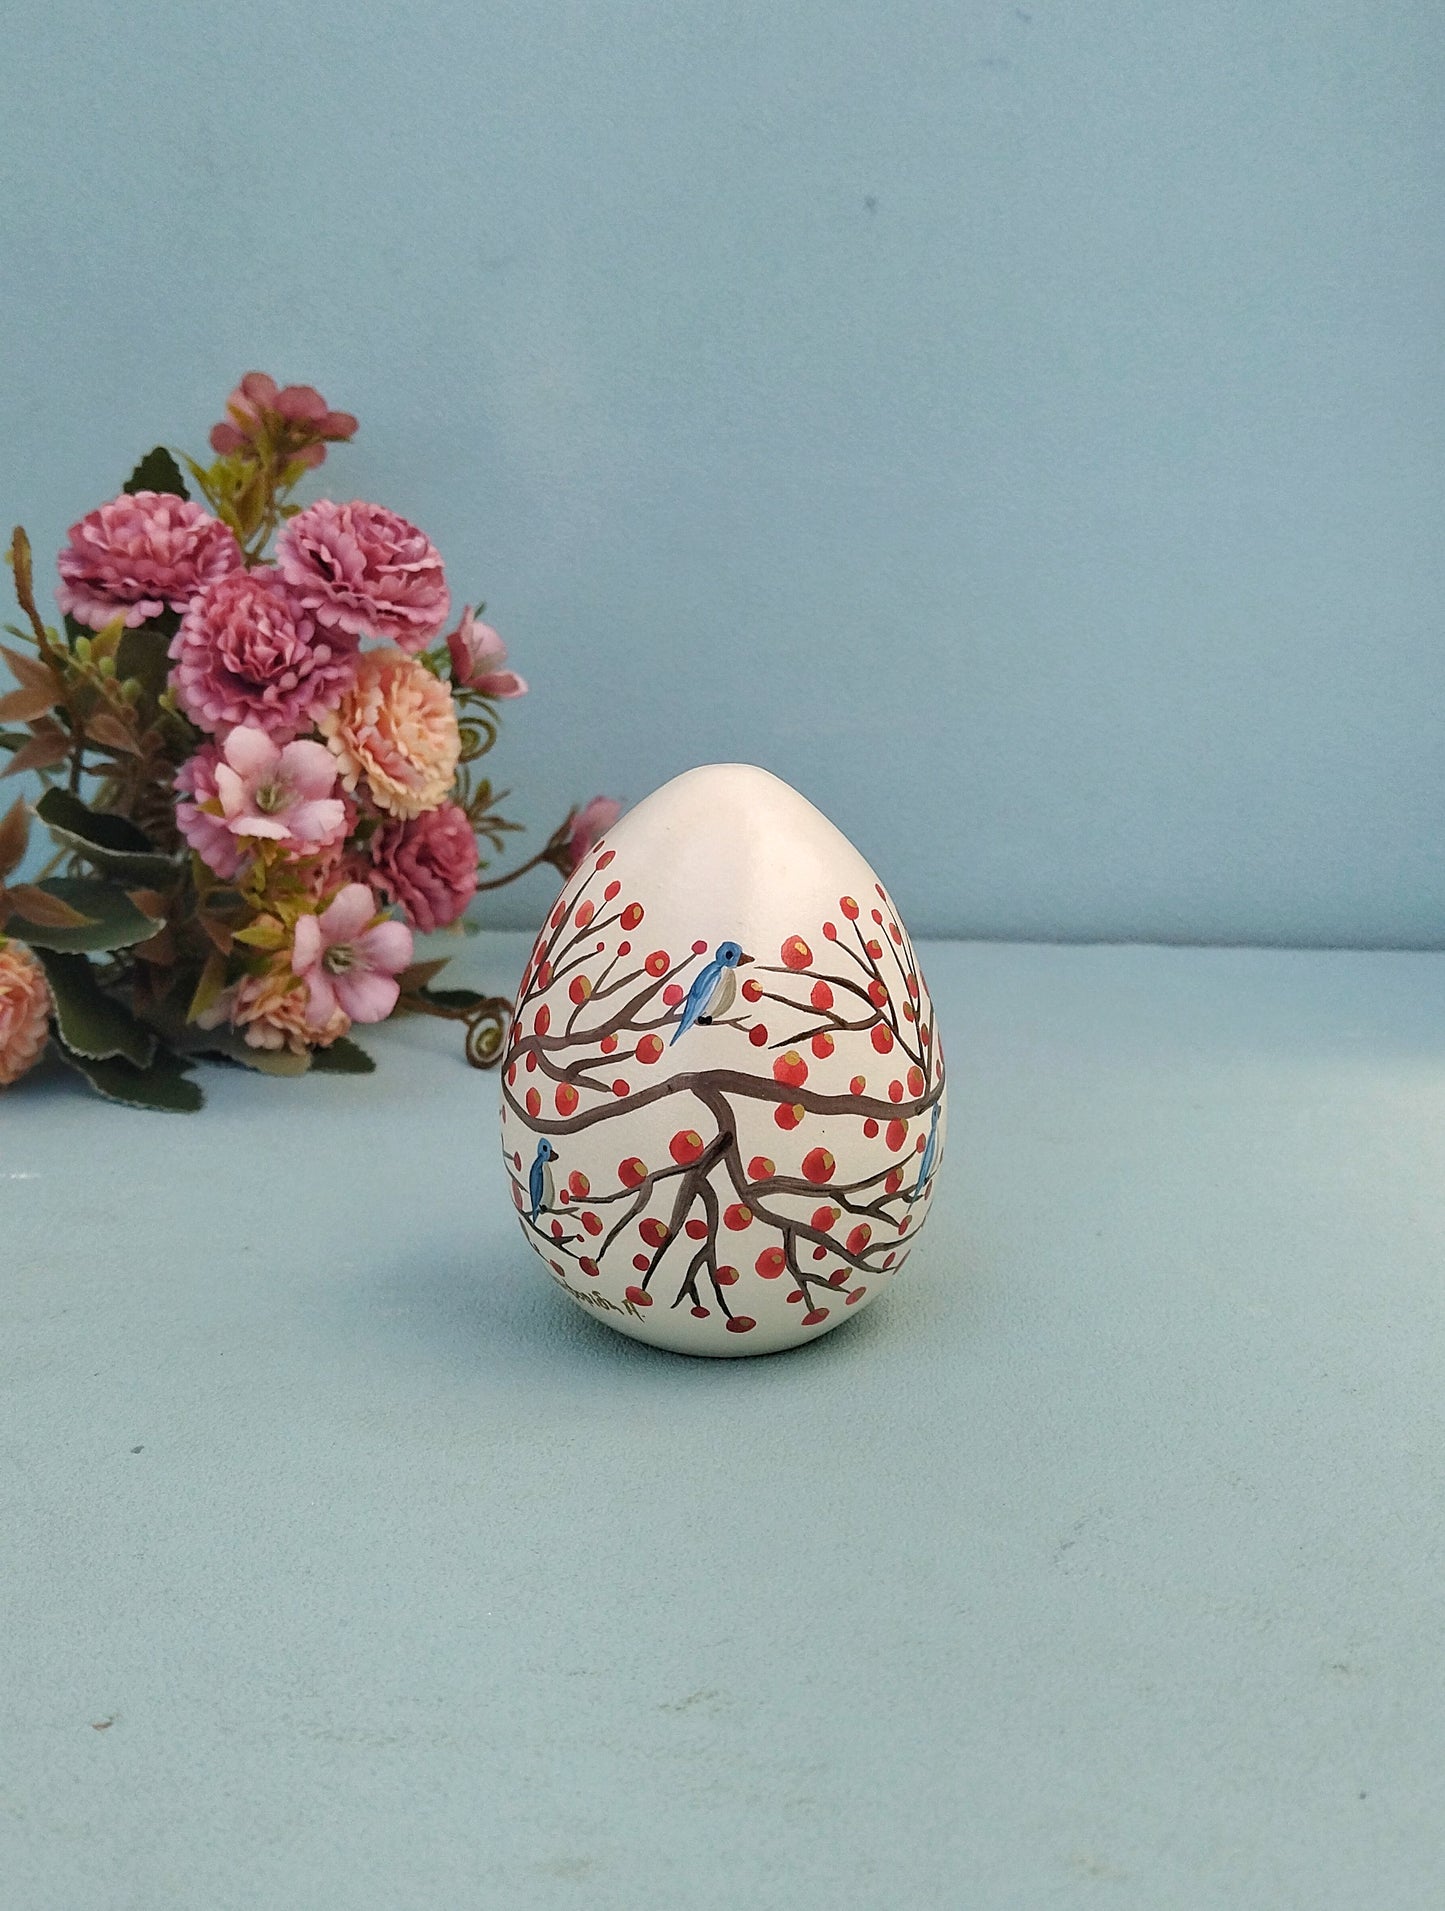 Ceramic Easter Egg With Birds On Branches